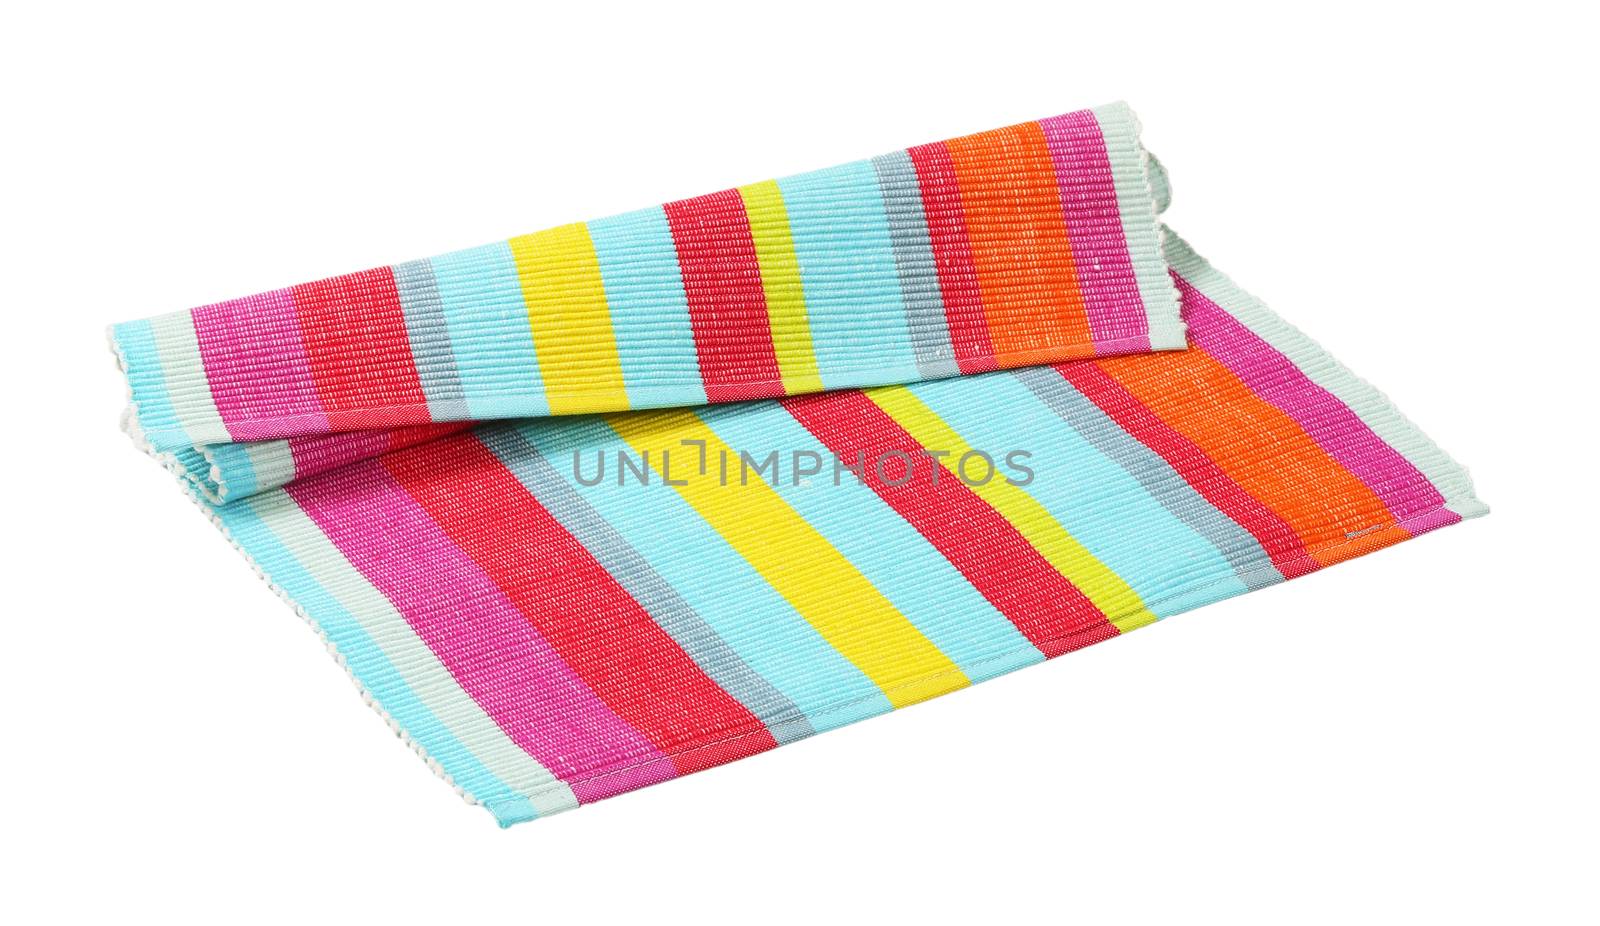 Colorful striped ribbed woven cotton place mat isolated on white